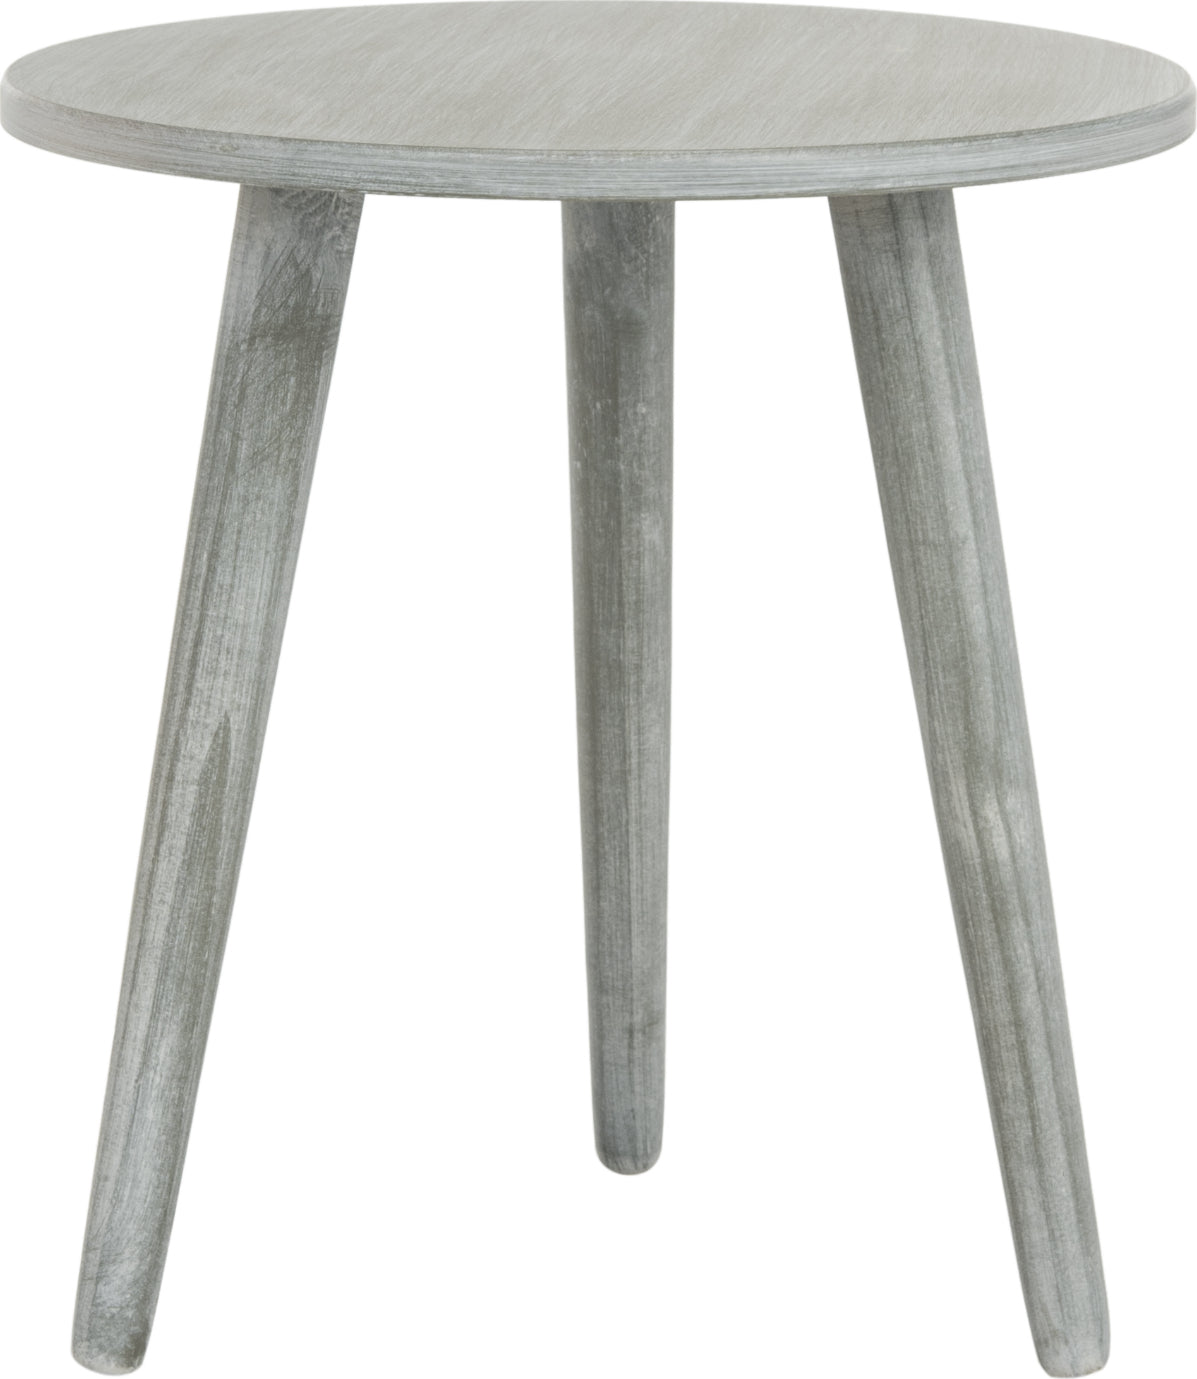 Safavieh Orion Round Accent Table Slate Grey Furniture main image